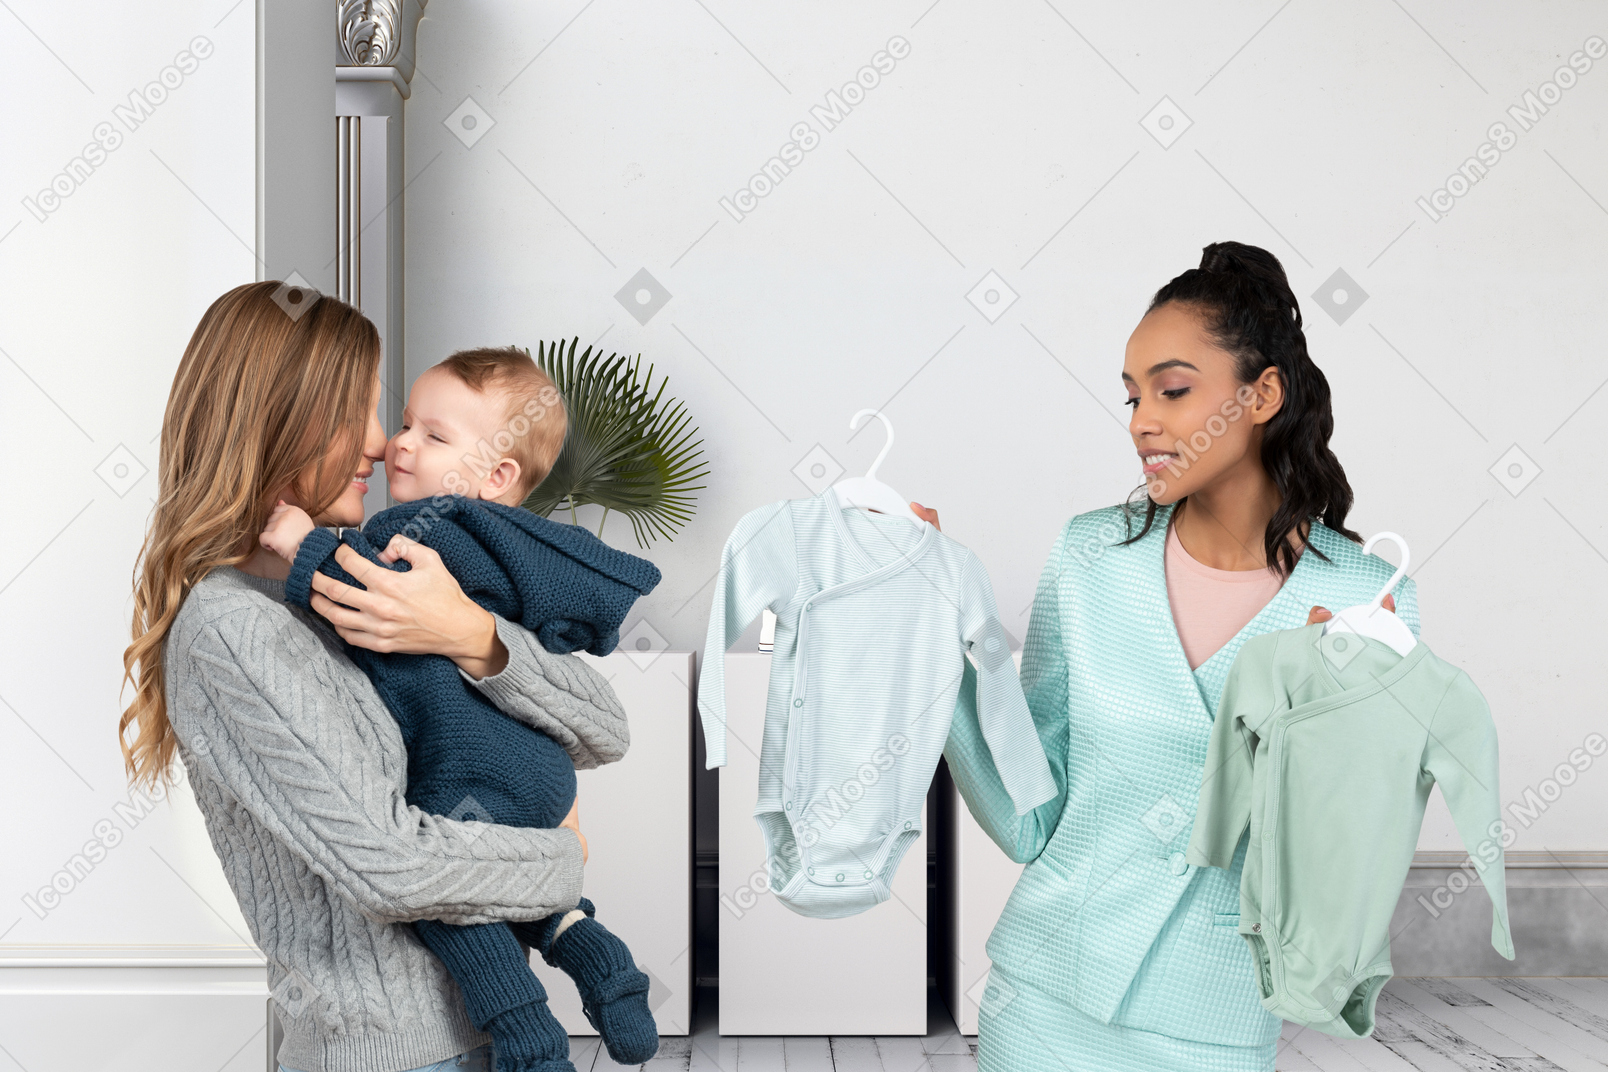 Woman with baby shopping for clothes